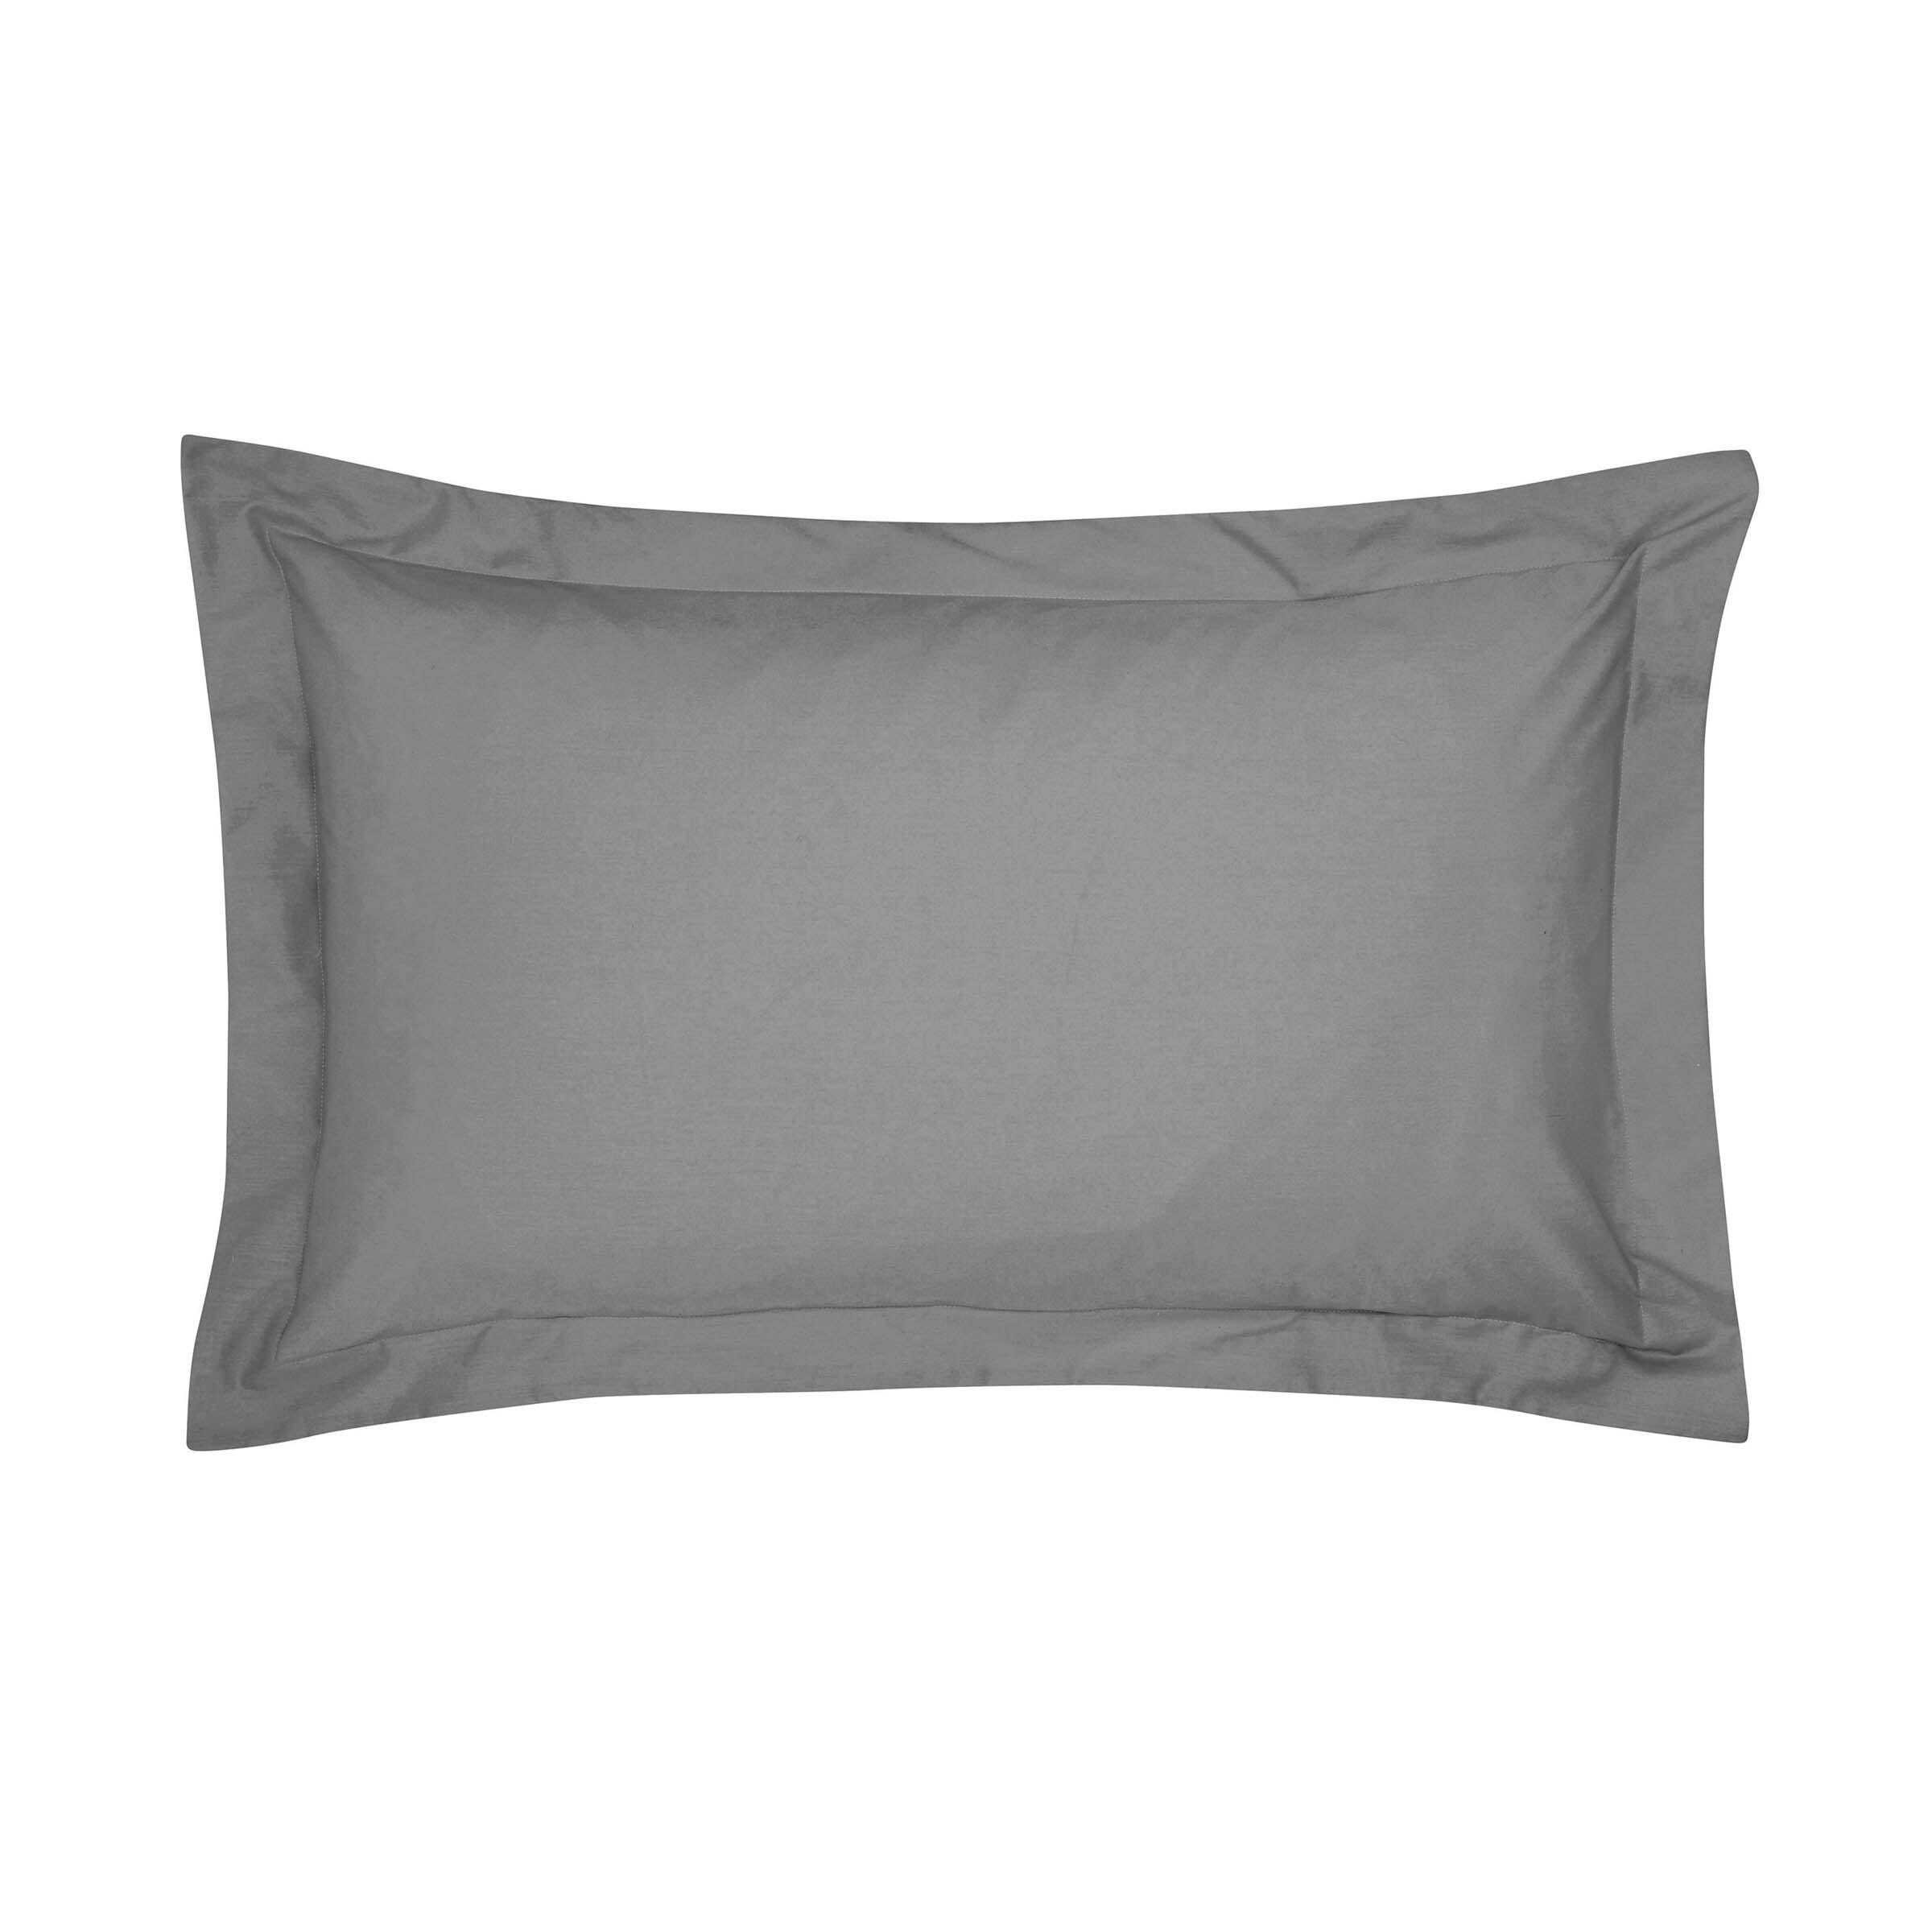 Bedeck of Belfast Fine Linens 300 Thread Count Egyptian Cotton Oxford Pillowcase, Charcoal - image 1